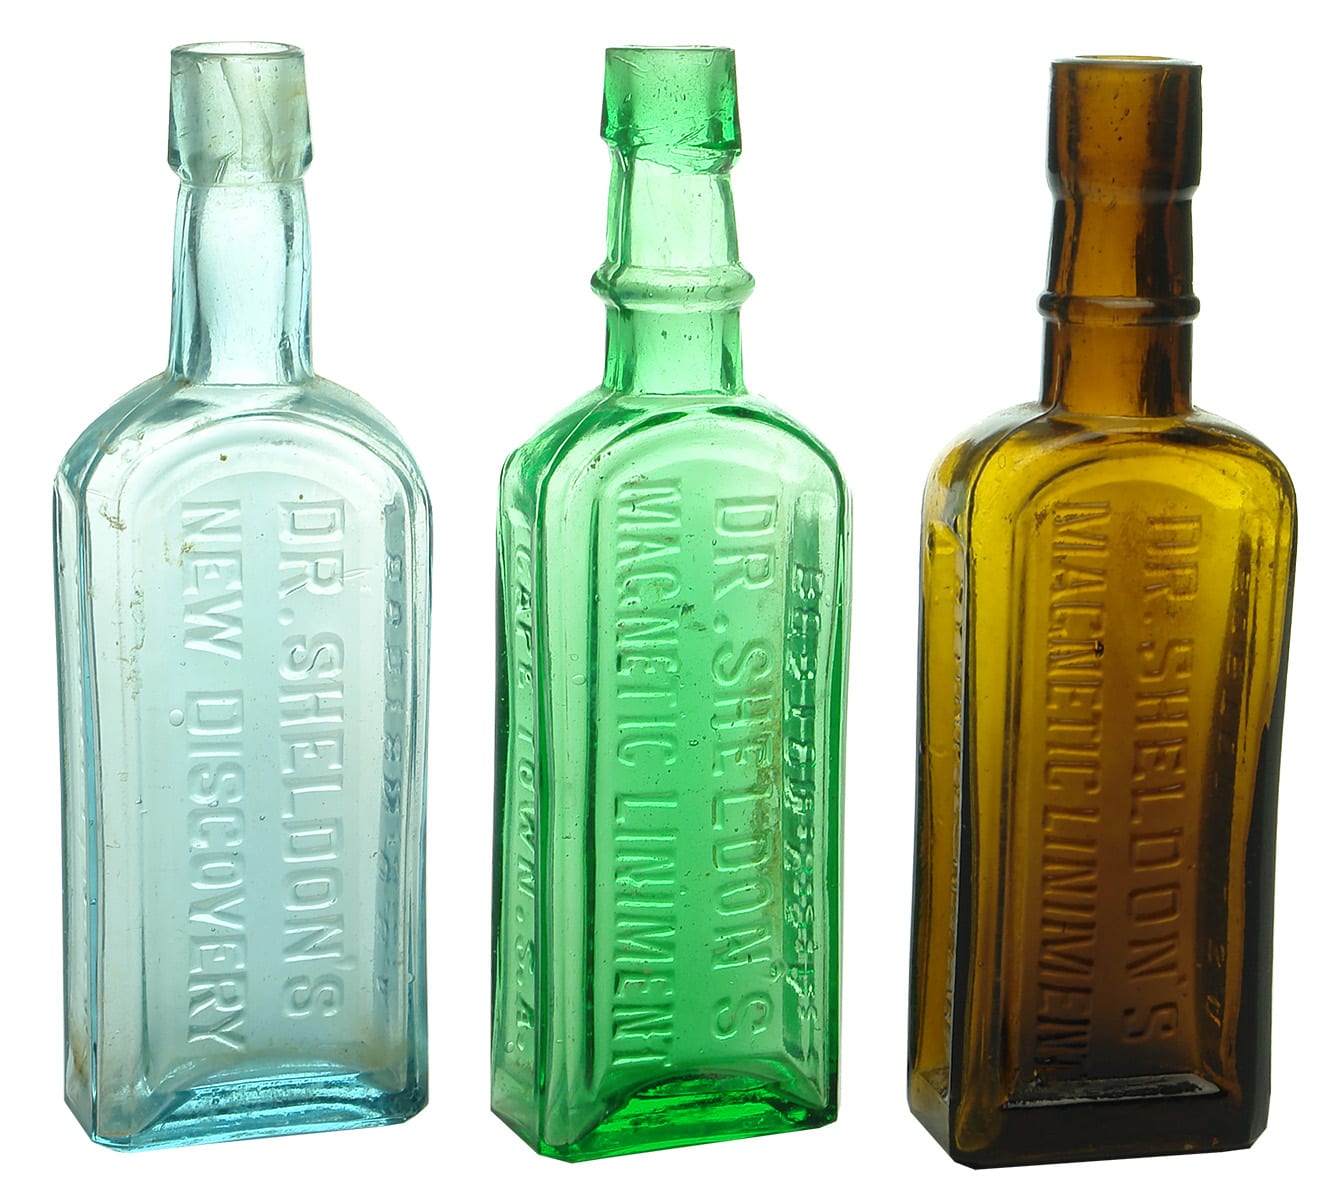 Dr Sheldons New Discovery Magnetic Liniment Antique Bottles